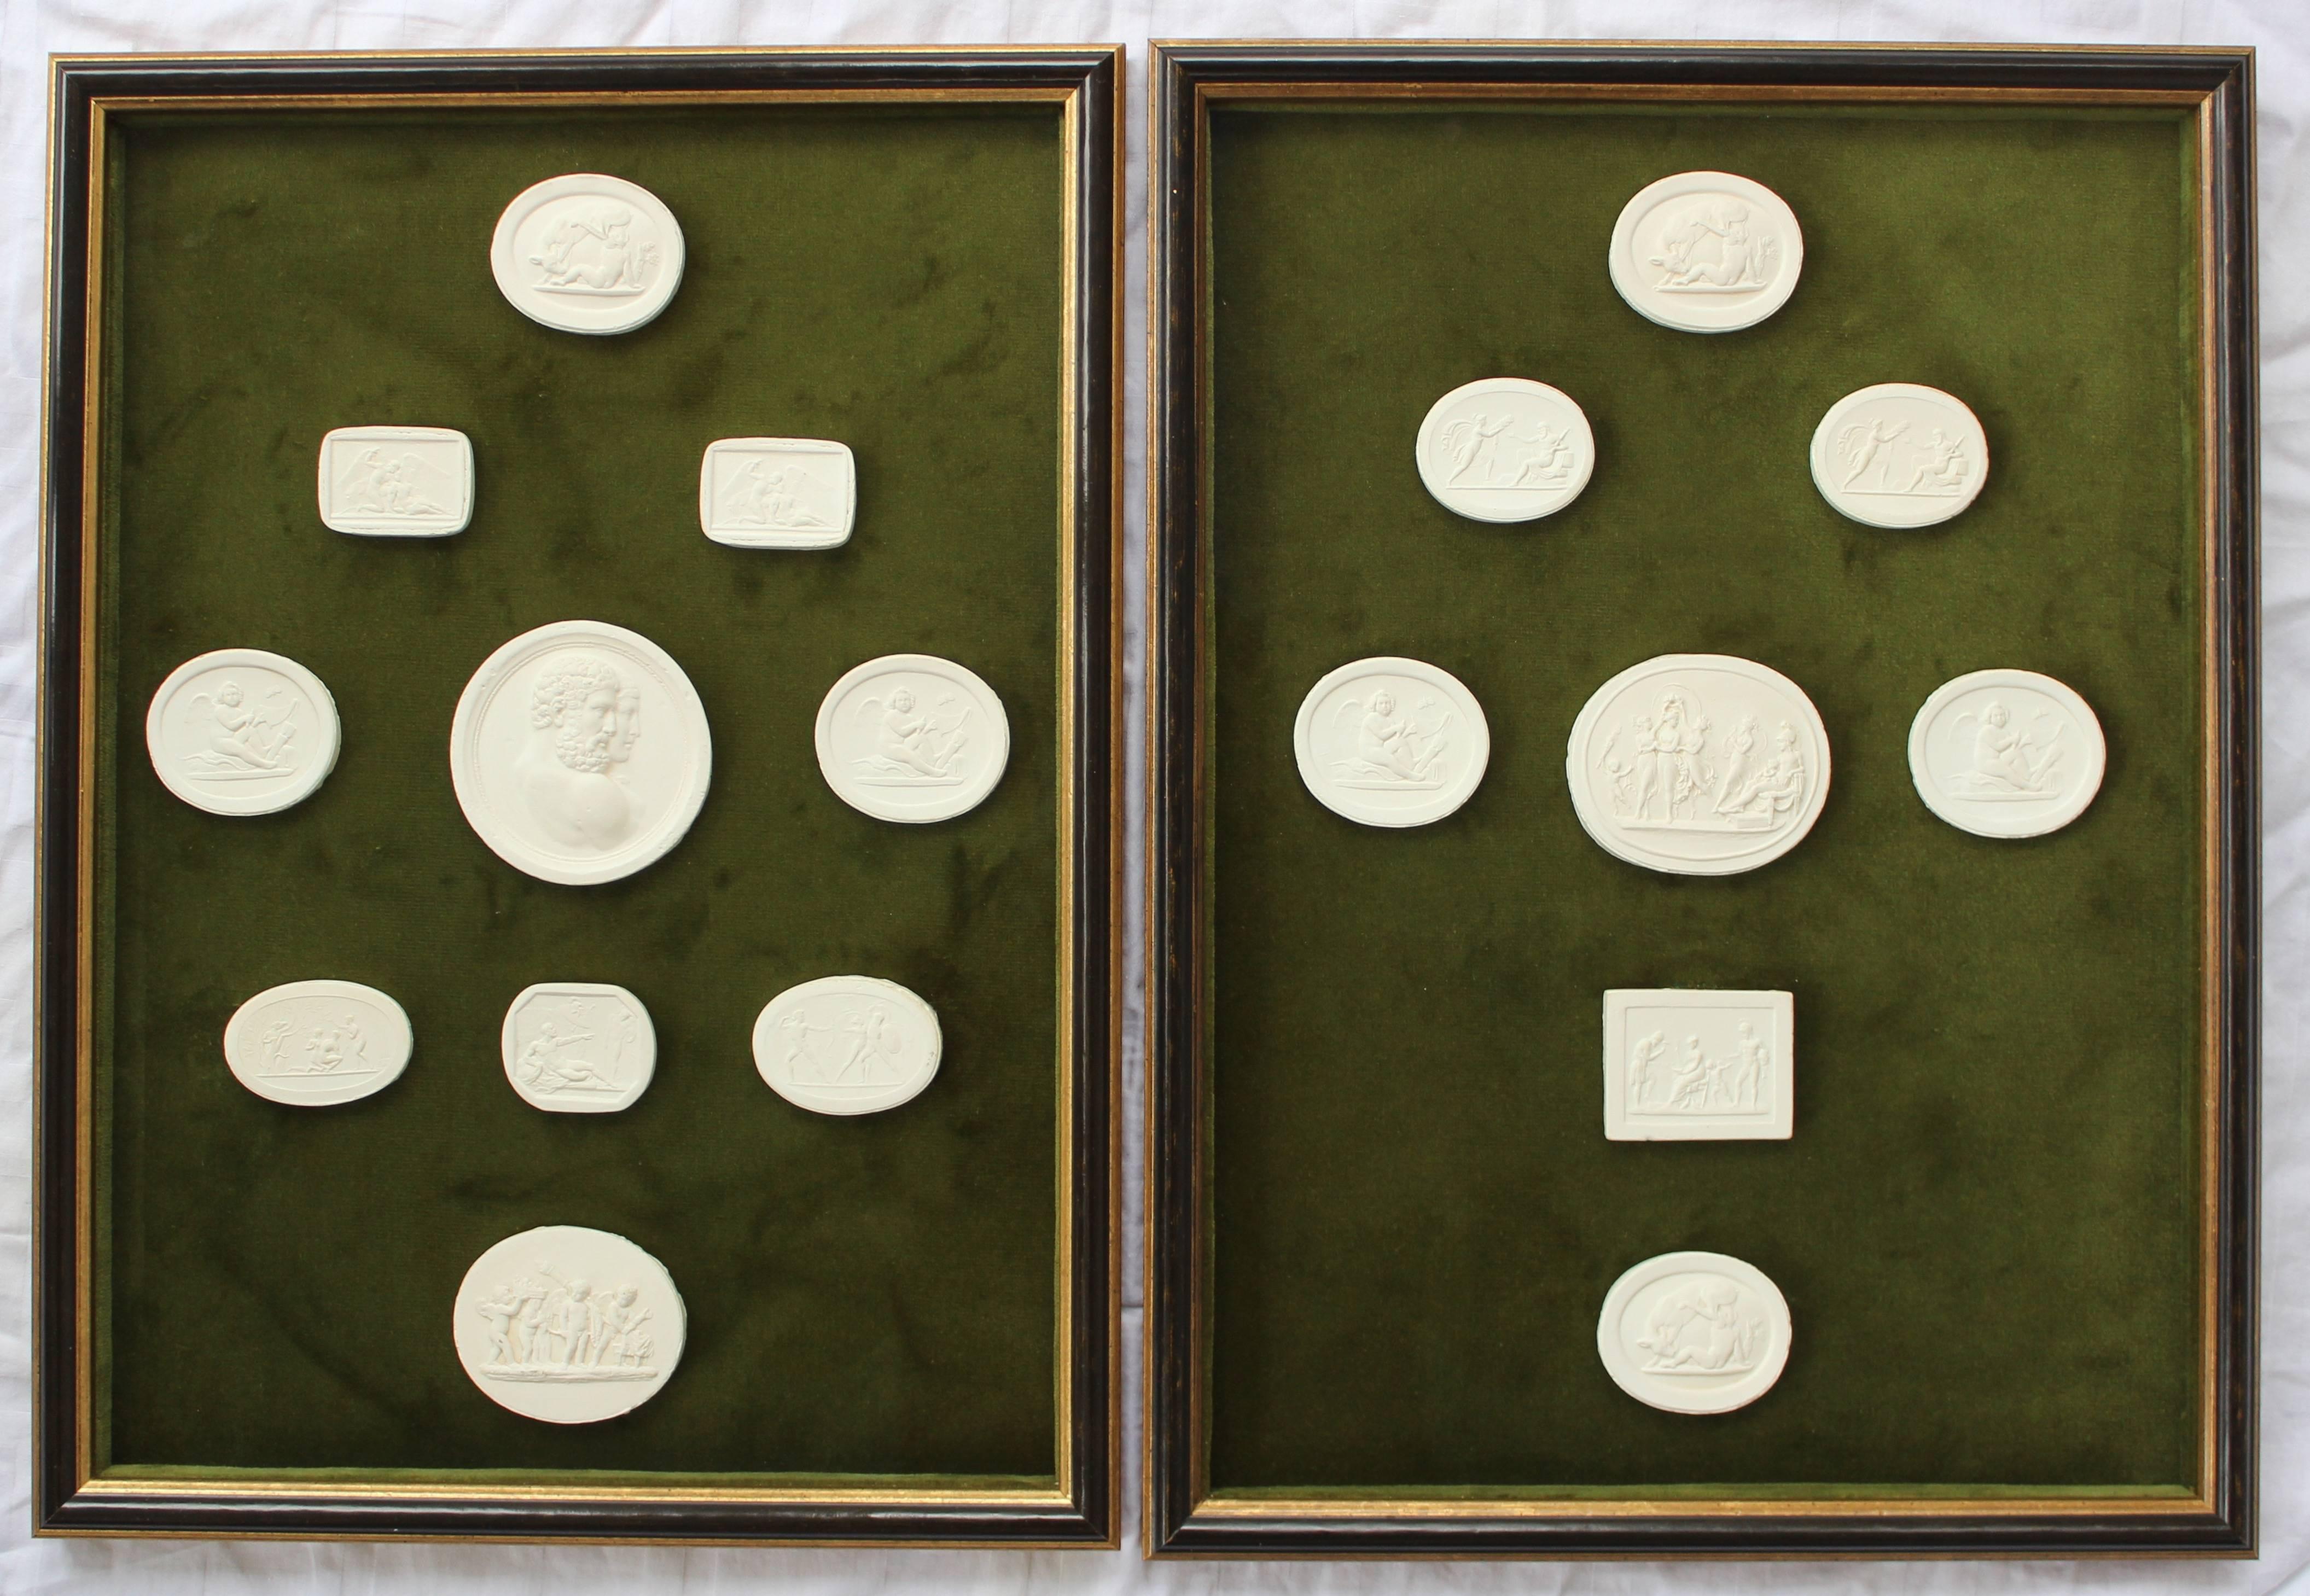 Collection of plaster intaglios. Newly framed on green velvet.

The two frames are slightly different in size.